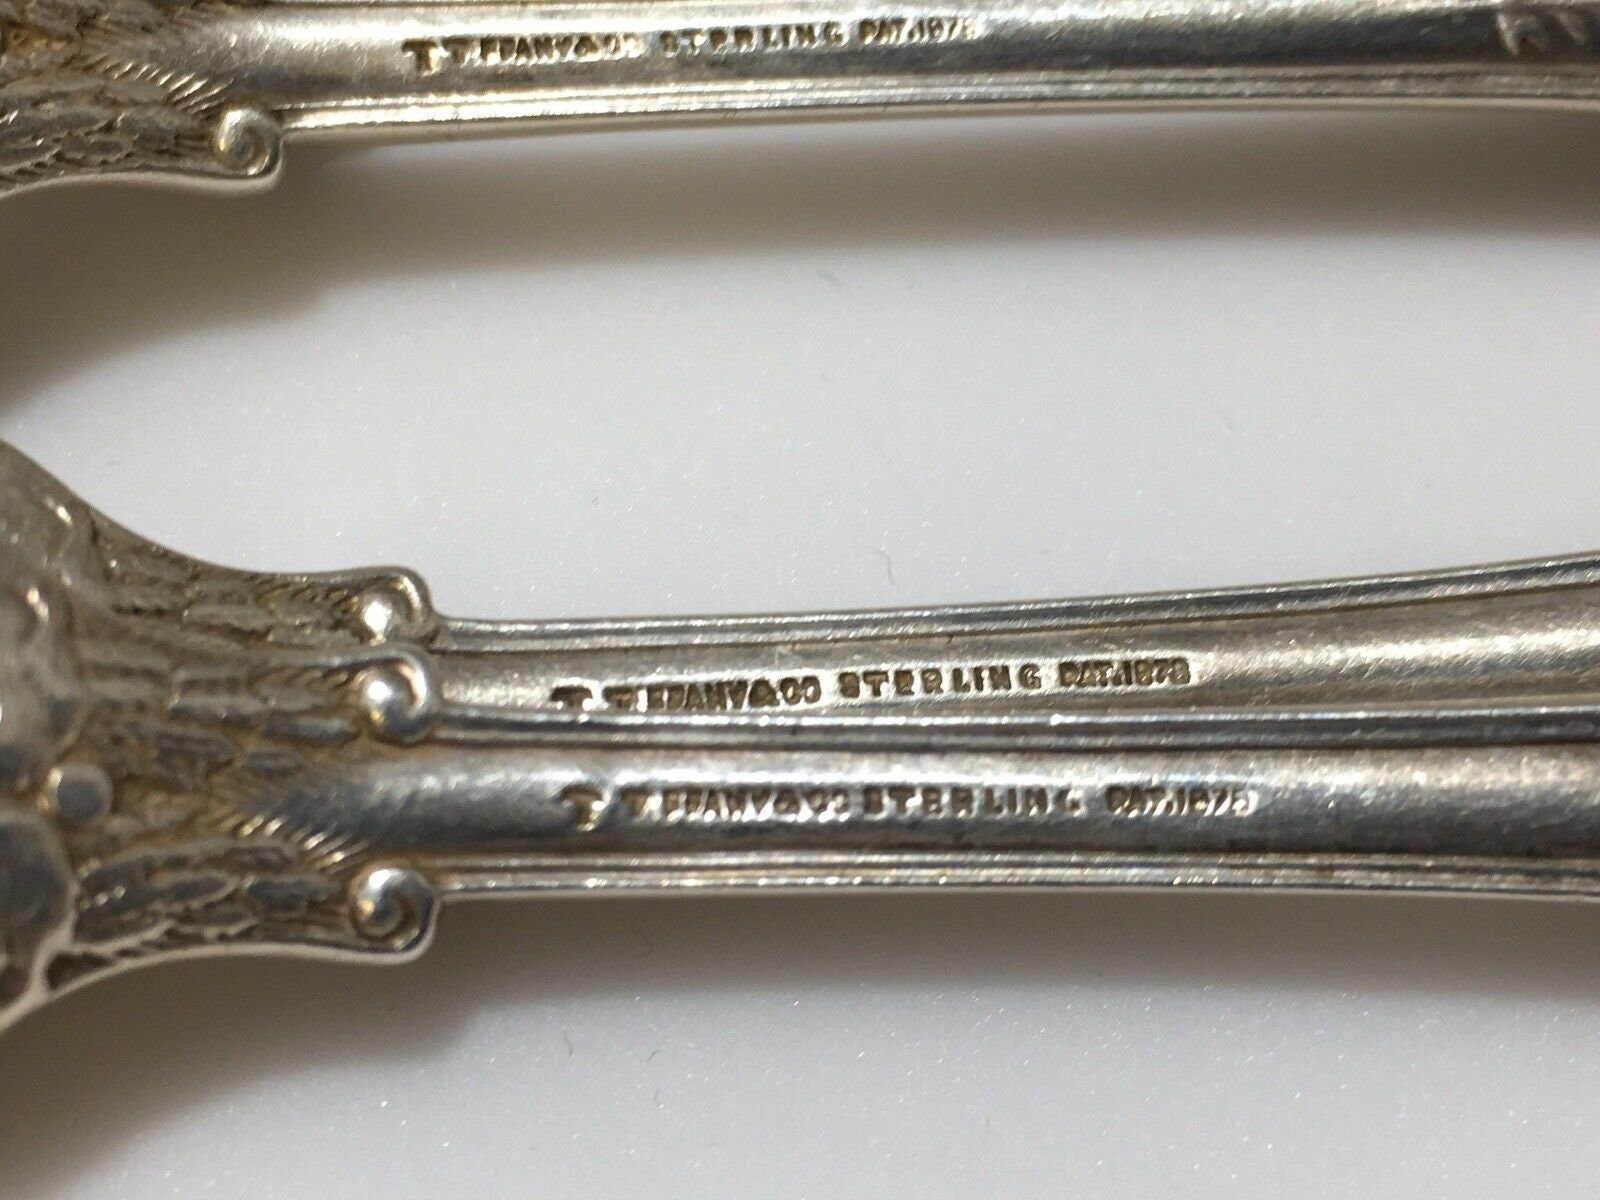 1 Of 4 Tiffany & Co Olympian Sterling Silver Grapefruit Citrus Spoons C 1878